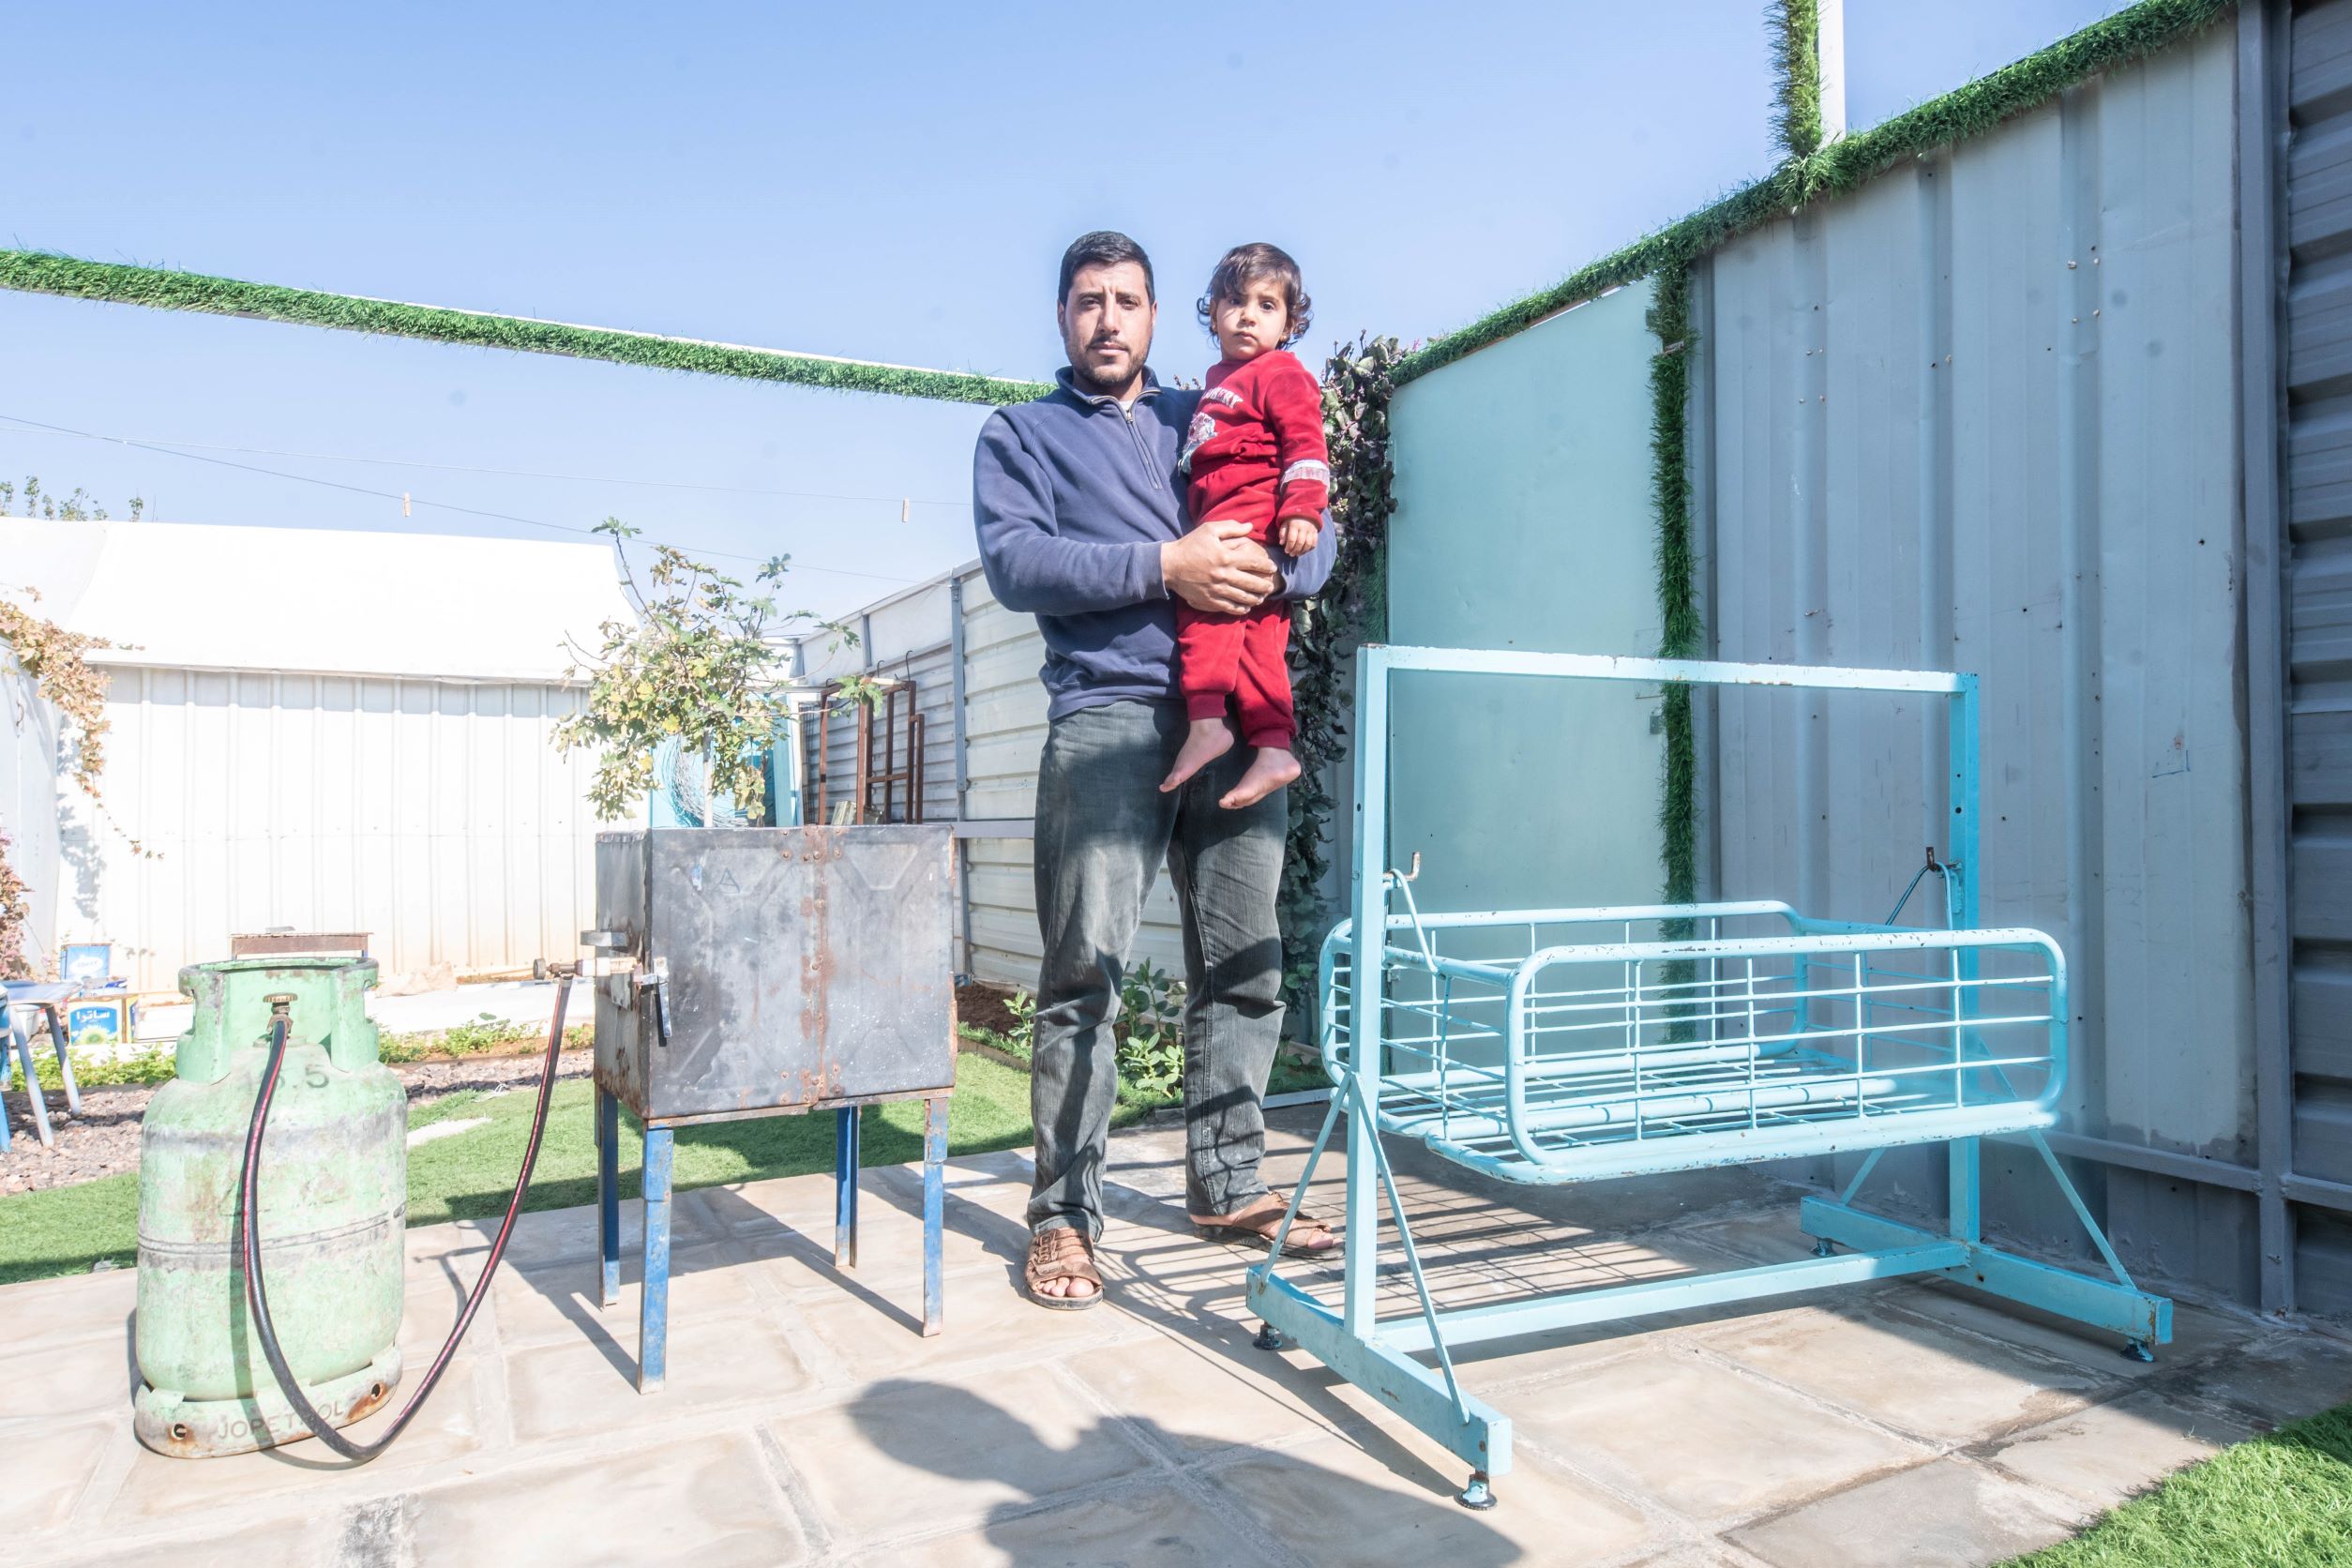 Arif is a very talented craftsman. He has built a seesaw for his little daughter using some of the few materials that can be found in the camp. He also converted a broken oven into a gas heater - upcycling and innovation at its best.